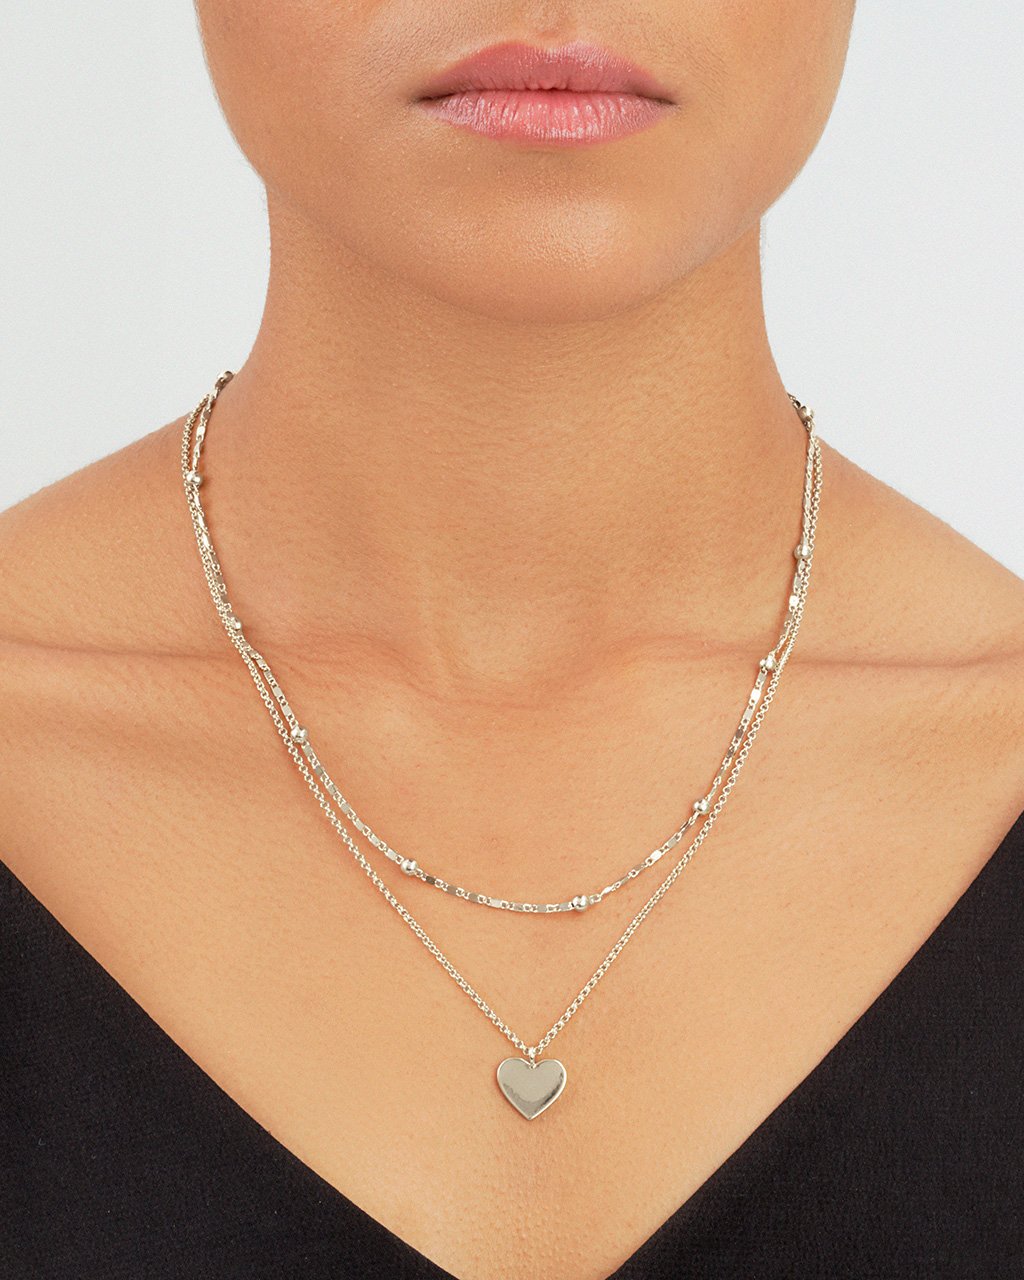 Beaded Chain & Heart Charm Layered Necklace by Sterling Forever